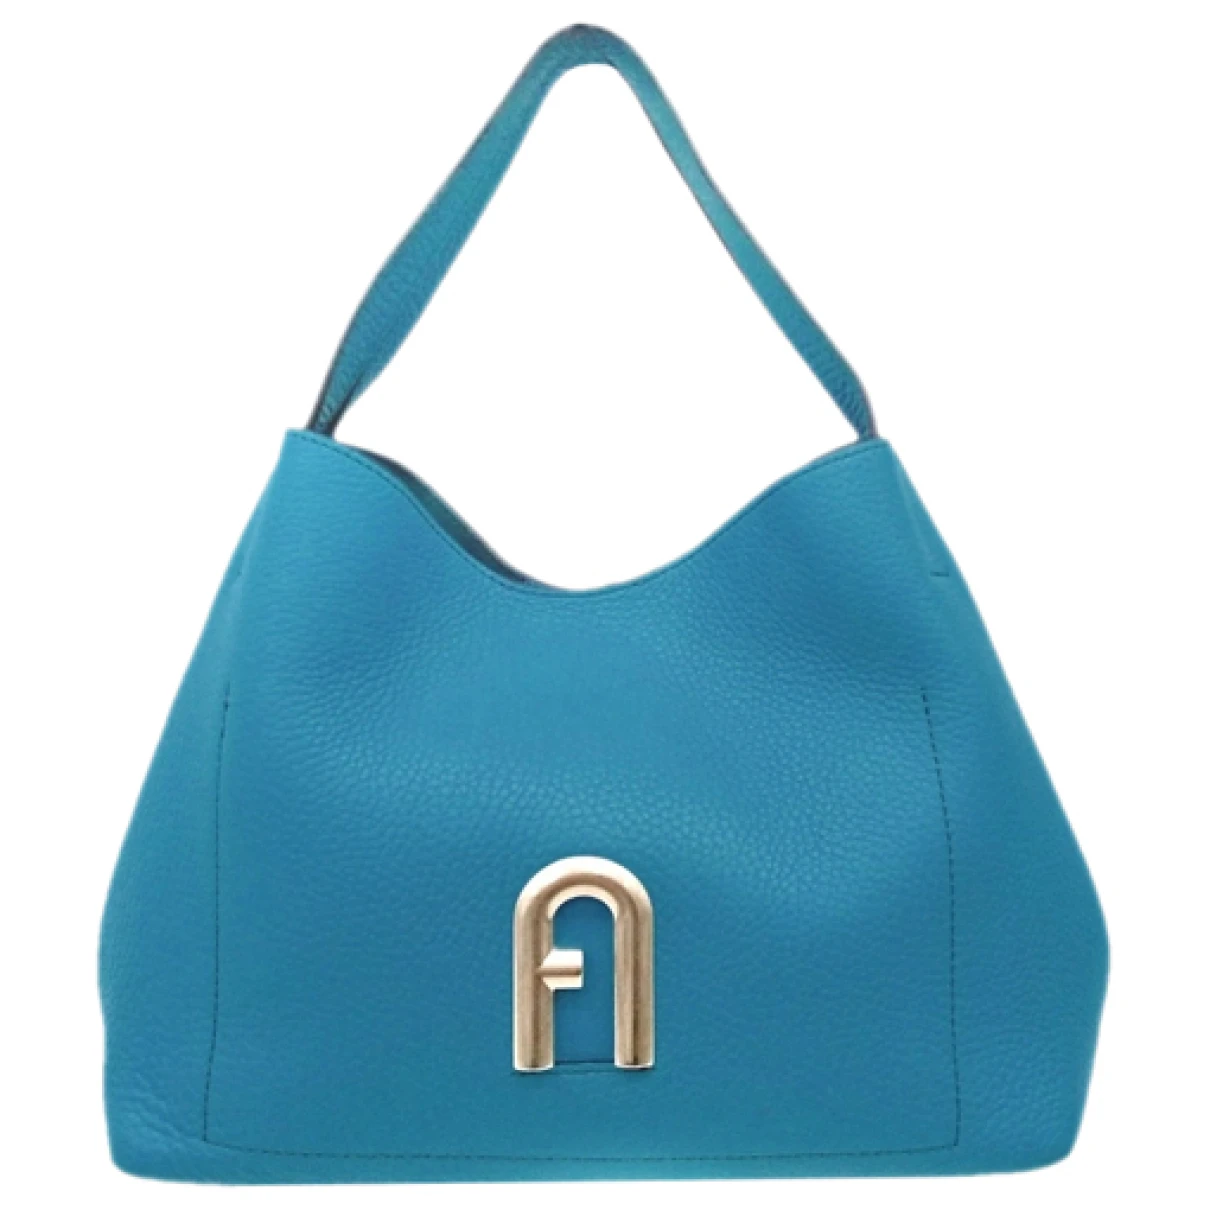 Pre-owned Furla Leather Tote In Blue